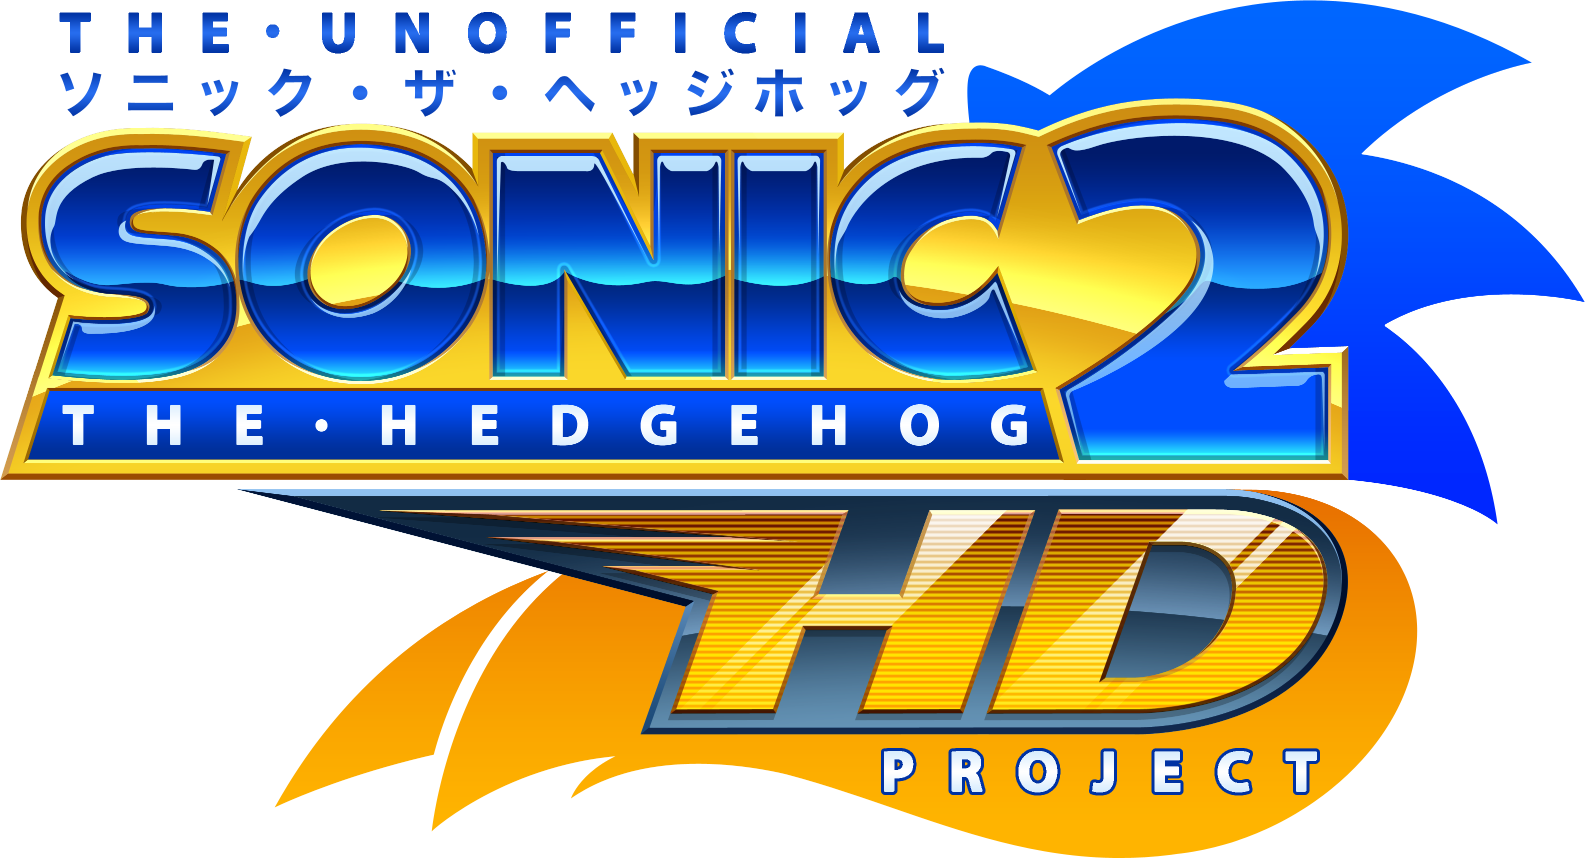 Sonic The Hedgehog 2 HD Project (Fan Game) - Is it any good?